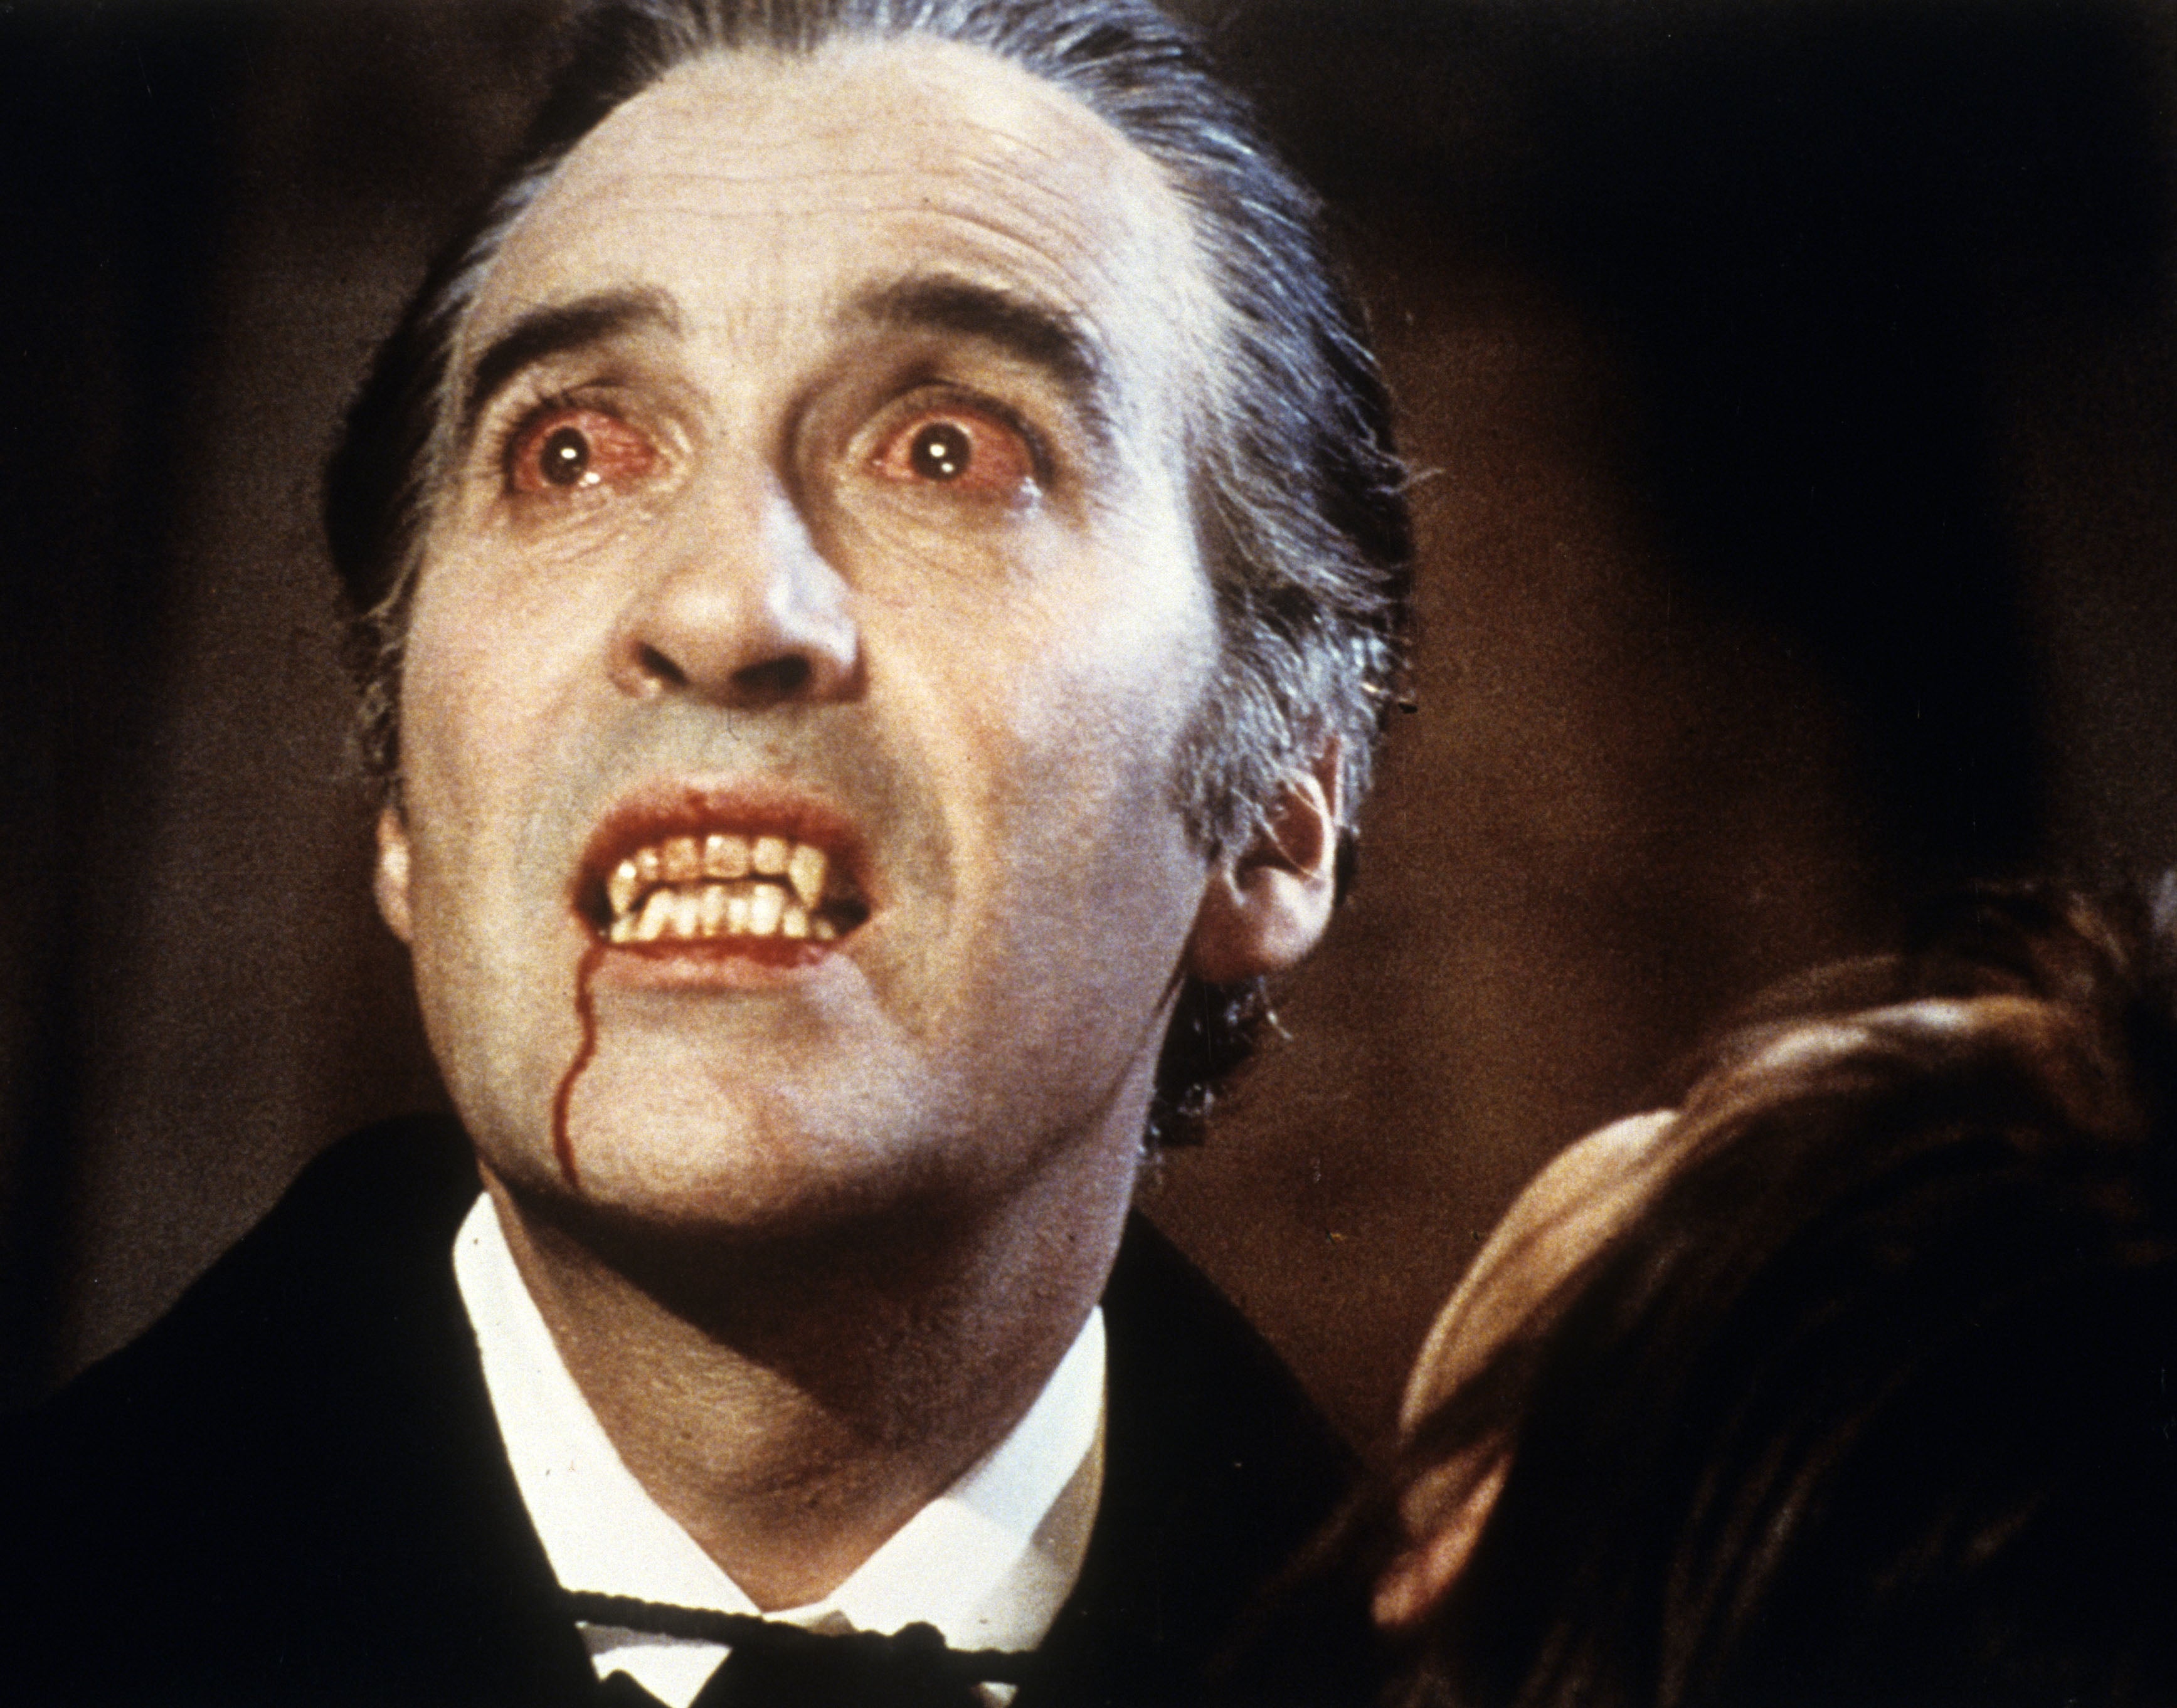 Christopher Lee’s iconic silent portrayal of Dracula in the 1958 film was not always the plan